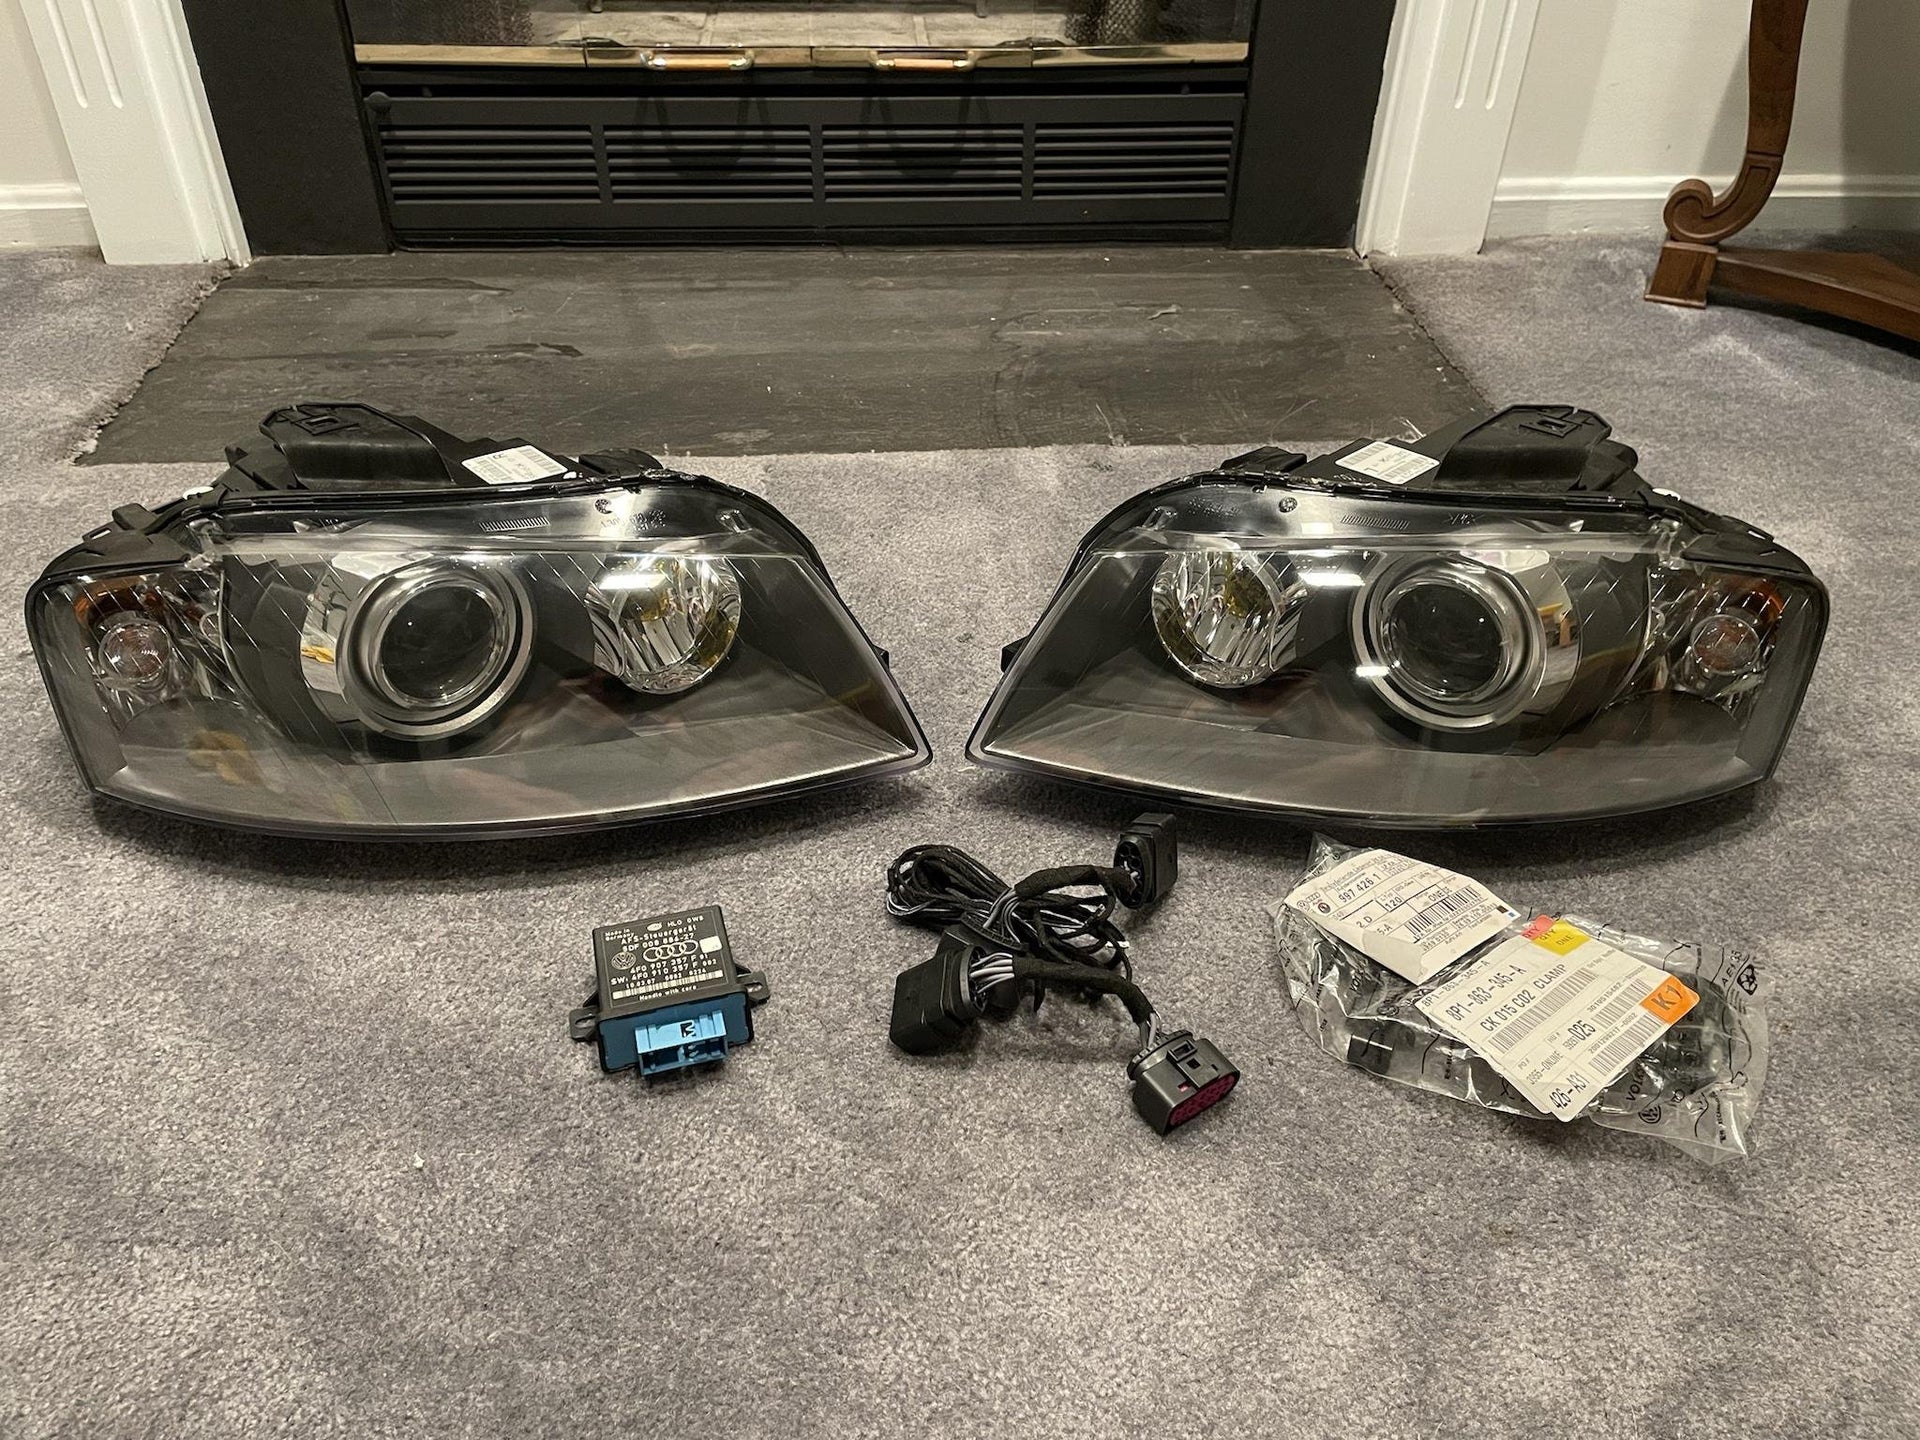 SOLD - A3 8P Projector Headlights and Halogen to HID Conversion